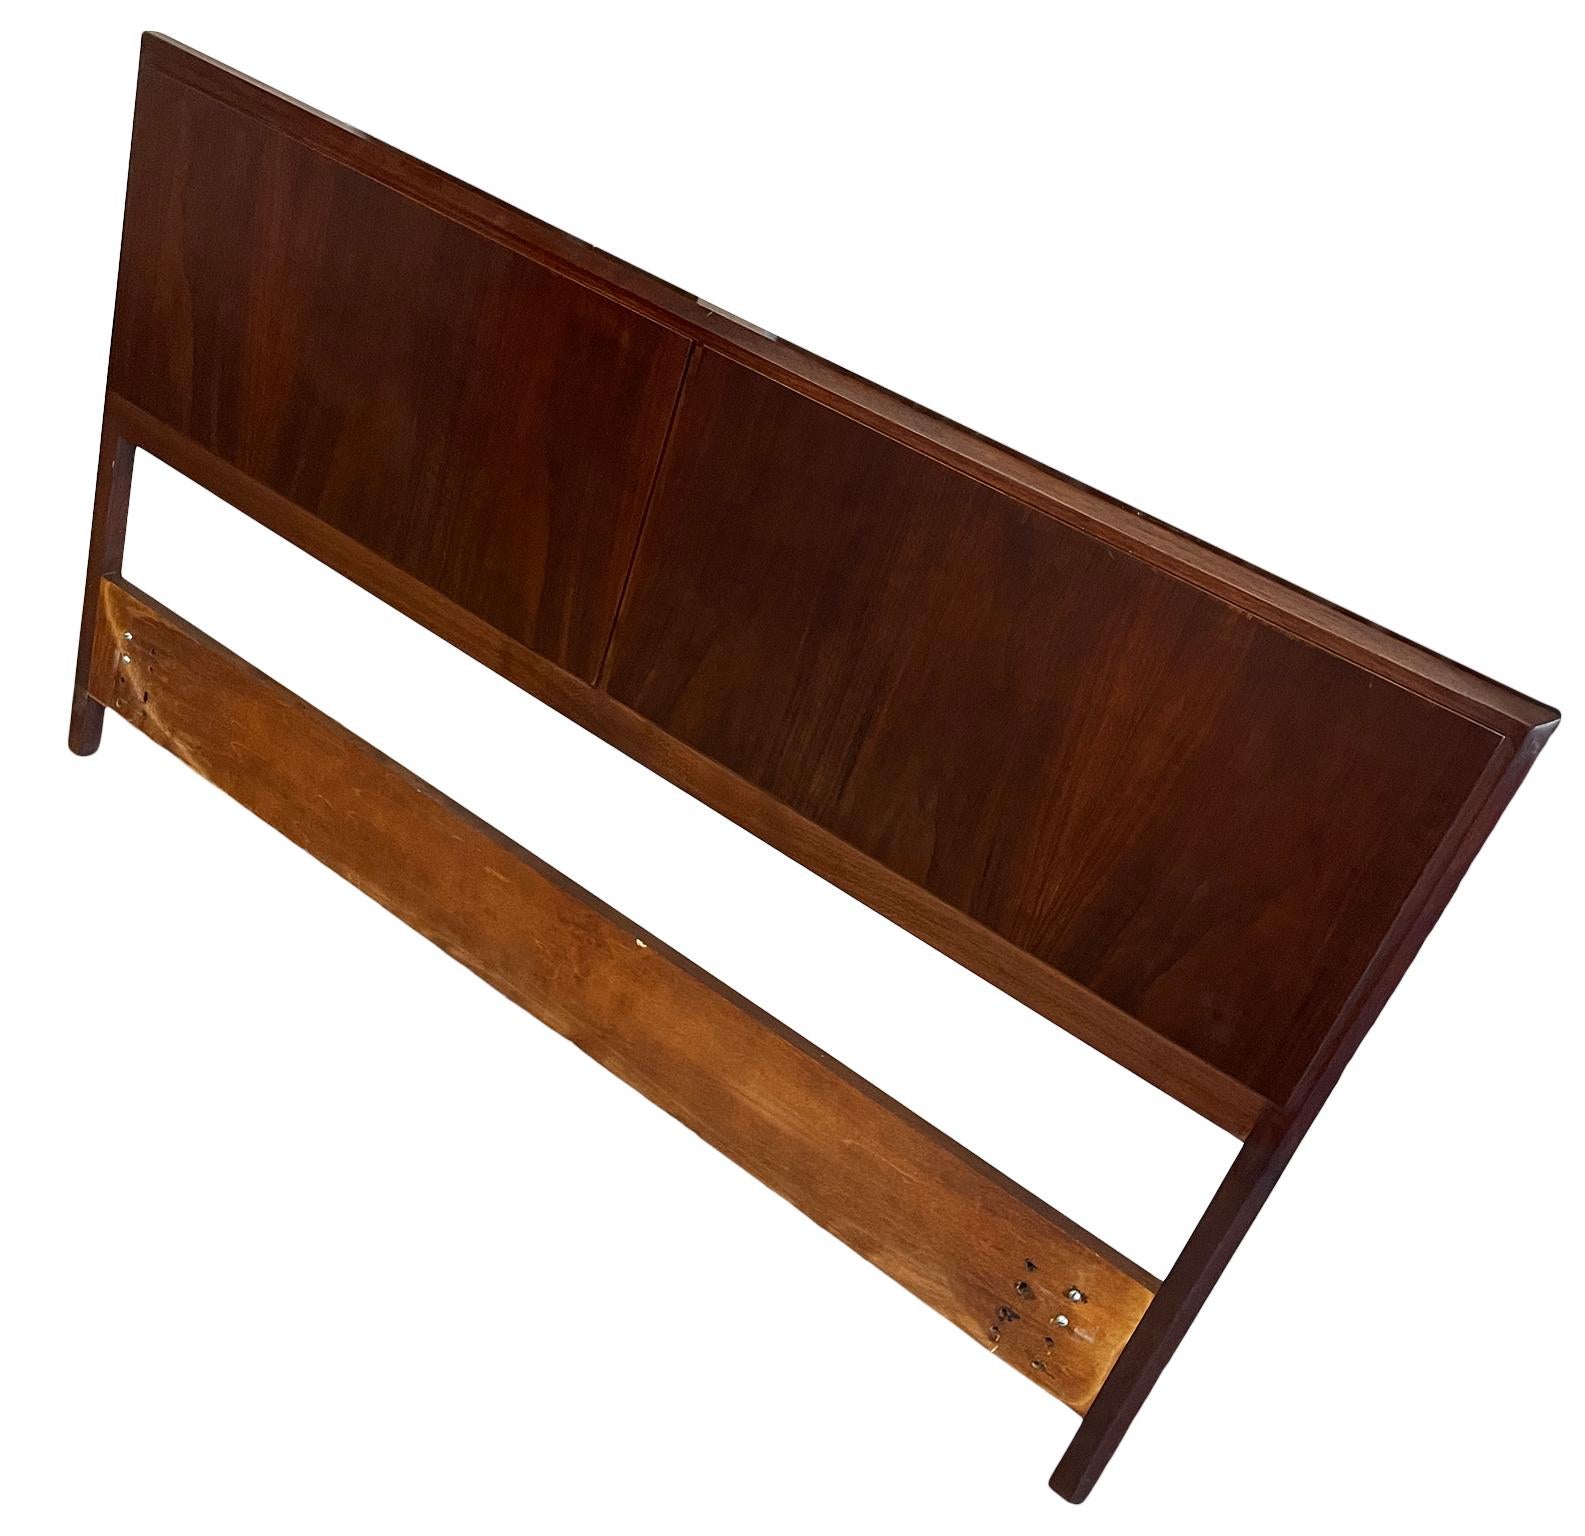 Beautiful Danish Mid-Century Modern Queen headboard made in Denmark in wonderful condition. Really nice Rosewood headboard with solid wood details. Fits a Queen sized mattress. Bed headboard only no metal bed frame. Easily mounts to all bed